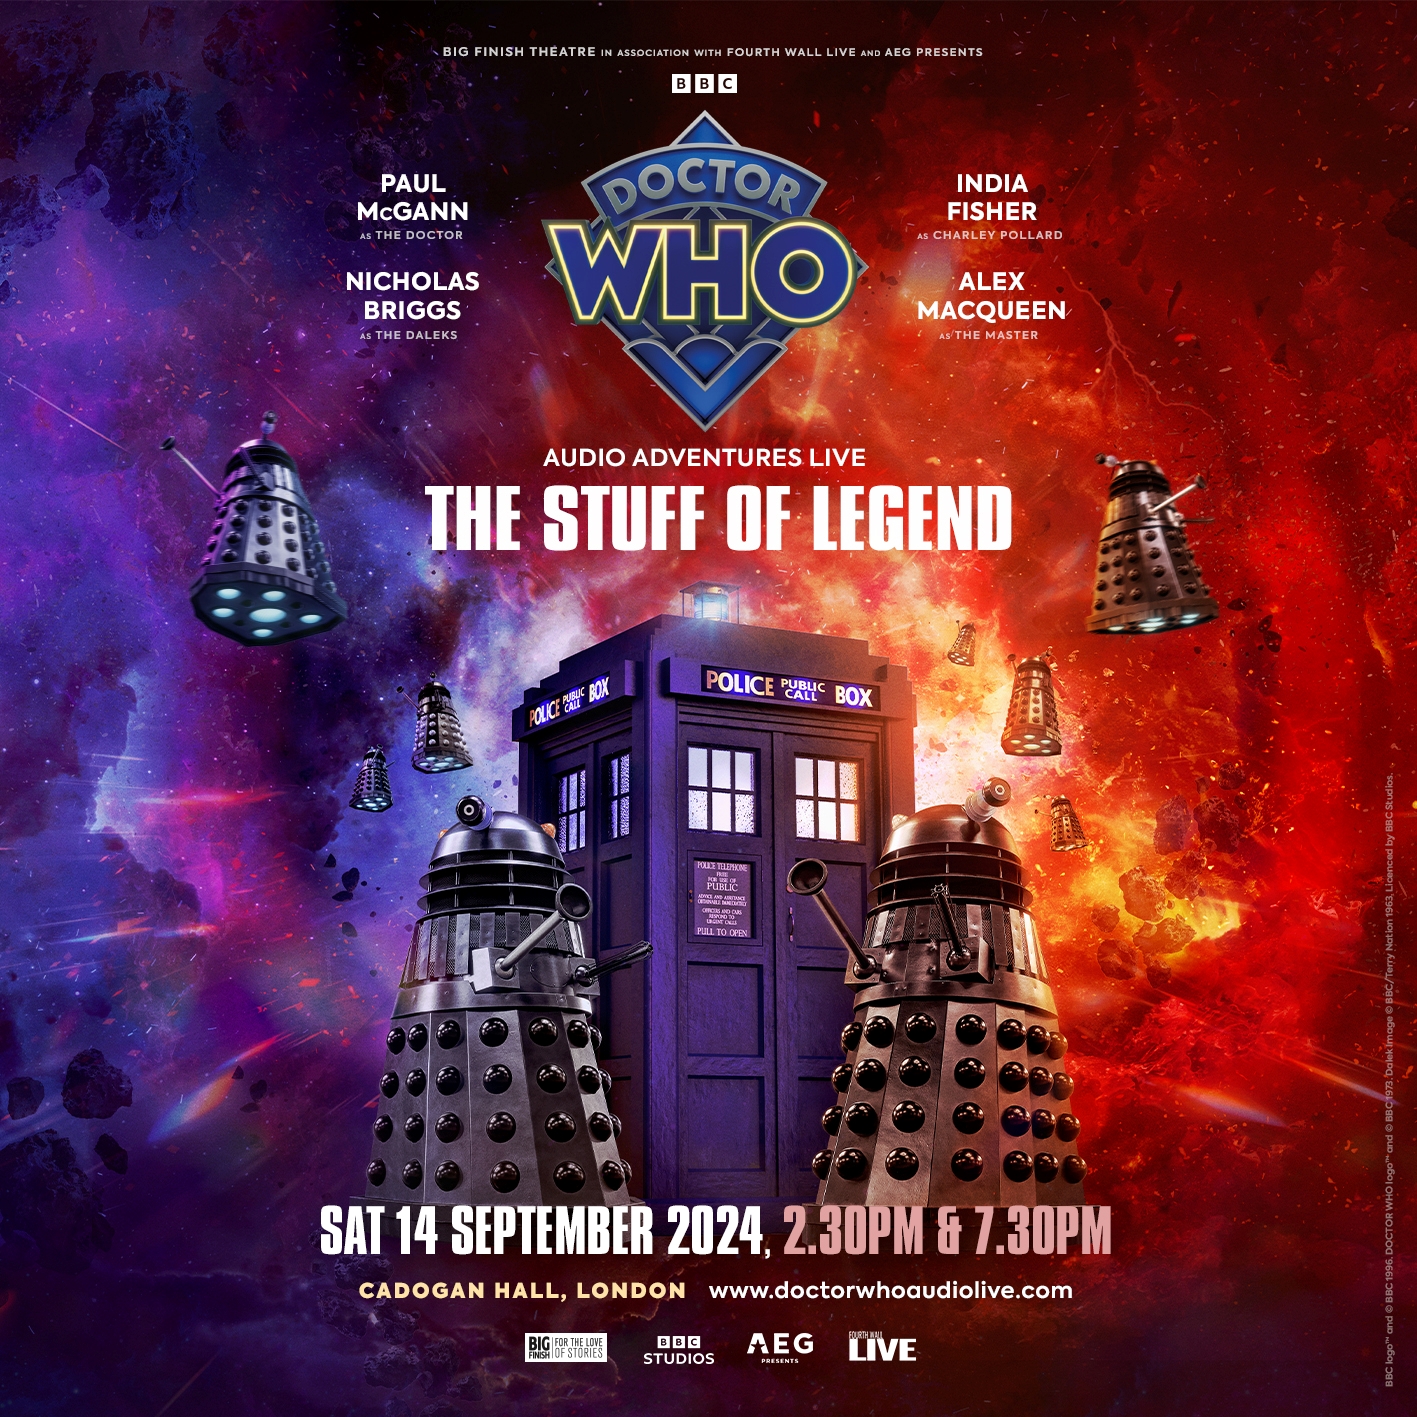 Poster advertsing Doctor Who - The Stuff of Legend Live event